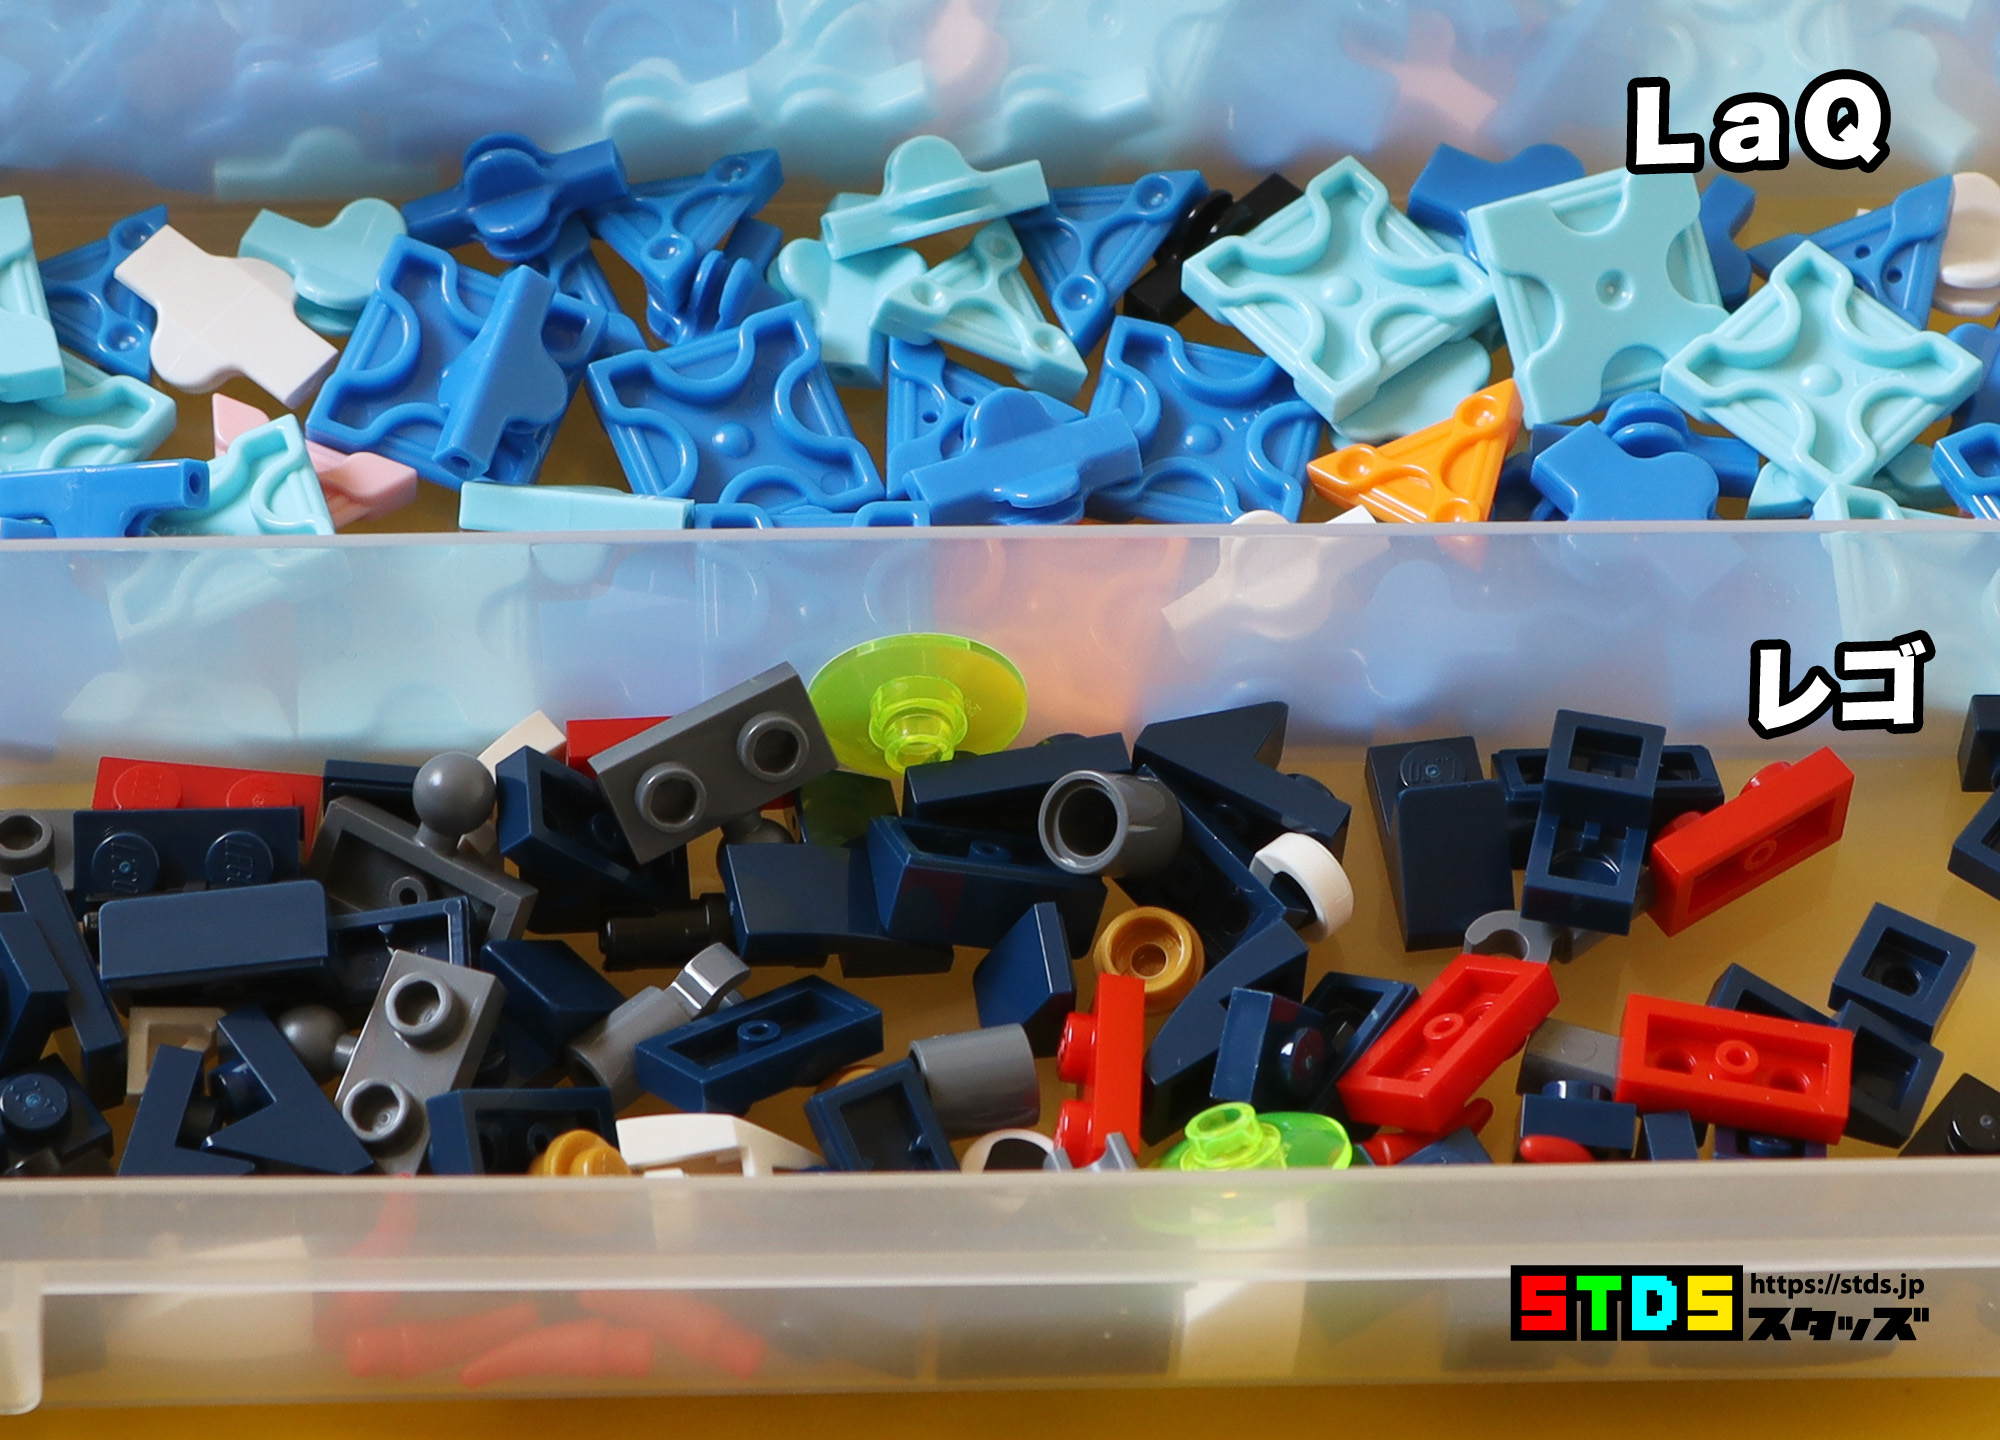 LEGO and LaQ Comparison Shark Review